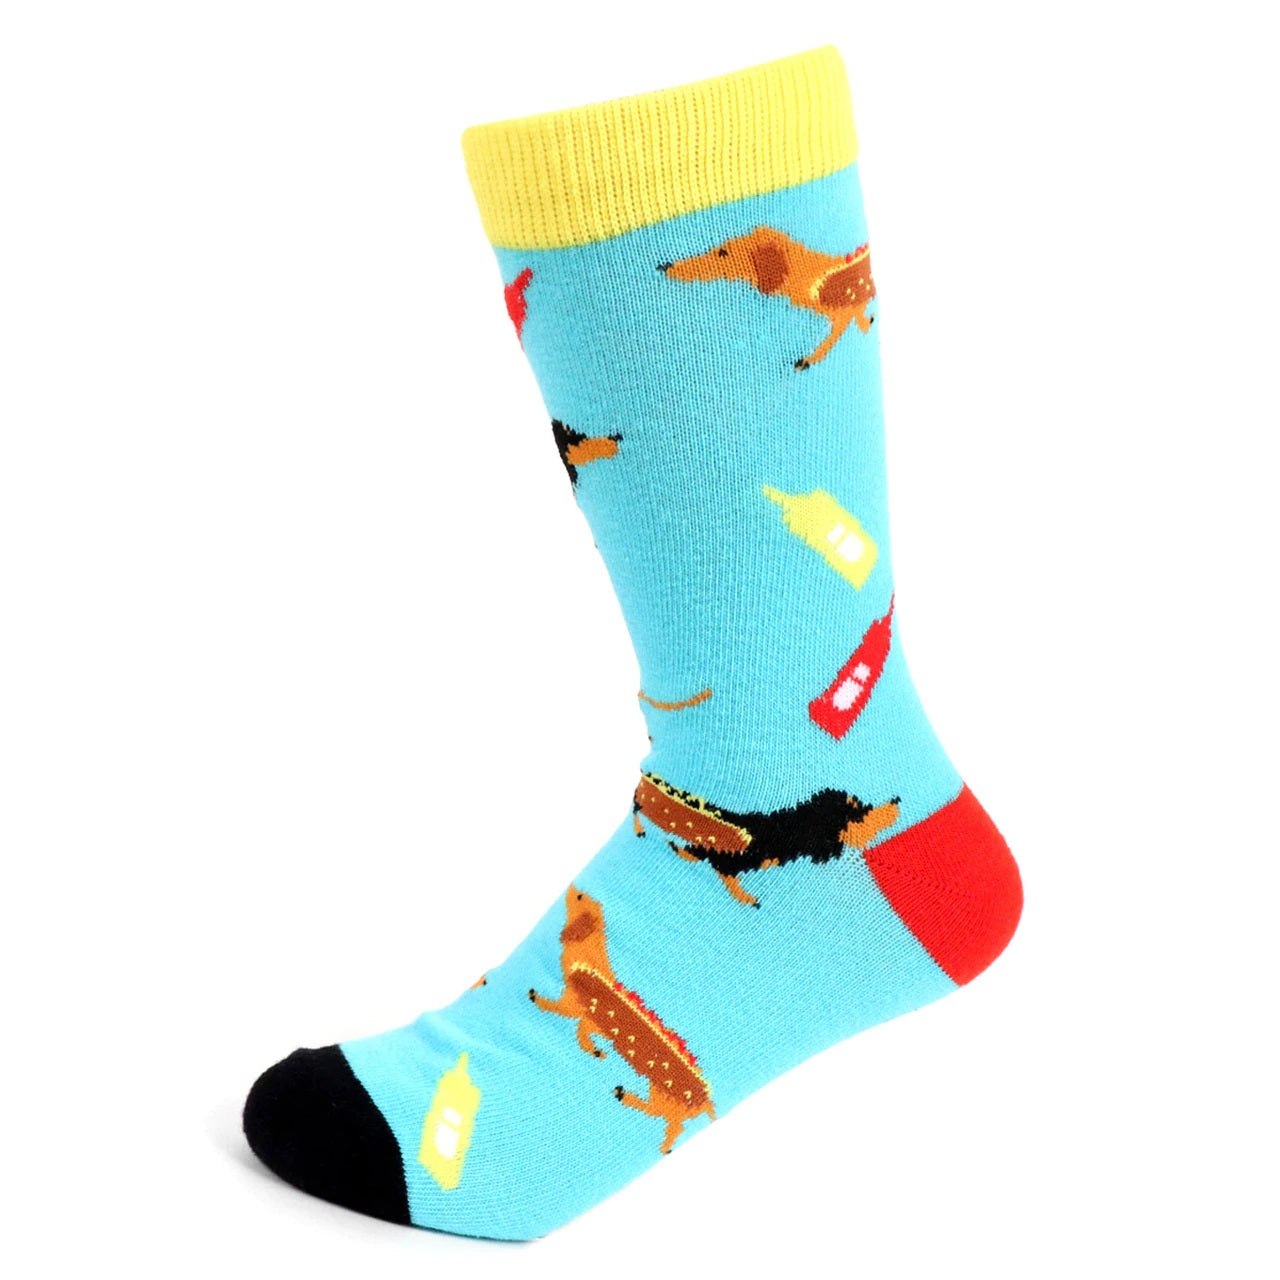 MashasCorner.com   Women's Hotdog Novelty Socks  Add some fun to your outfit with our Novelty Socks. These socks are perfect for when you have to maintain being a professional but still have that burning desire to be fun & silly! These socks are super soft & comfy.  70% Cotton, 25% Polyester, 5% spandex Sock size: 9-11 Shoe size: 4-10 Machine wash, tumble dry low Imported